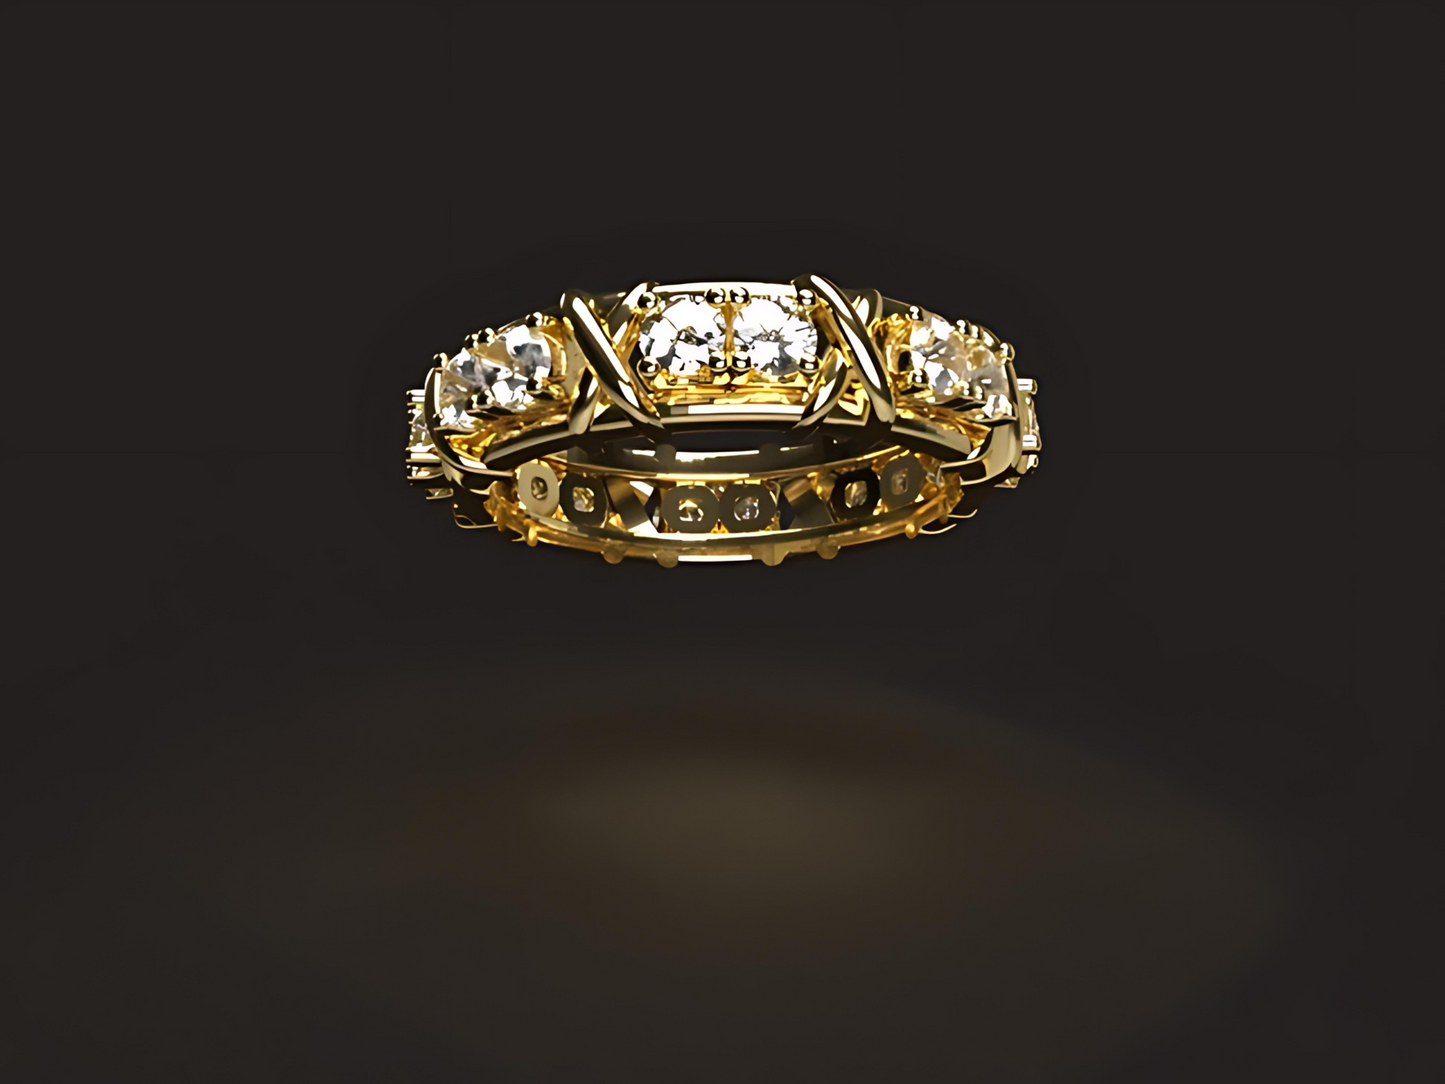 Handmade eternity gold ring with 1.6 ct. natural Vs high quality Diamonds.